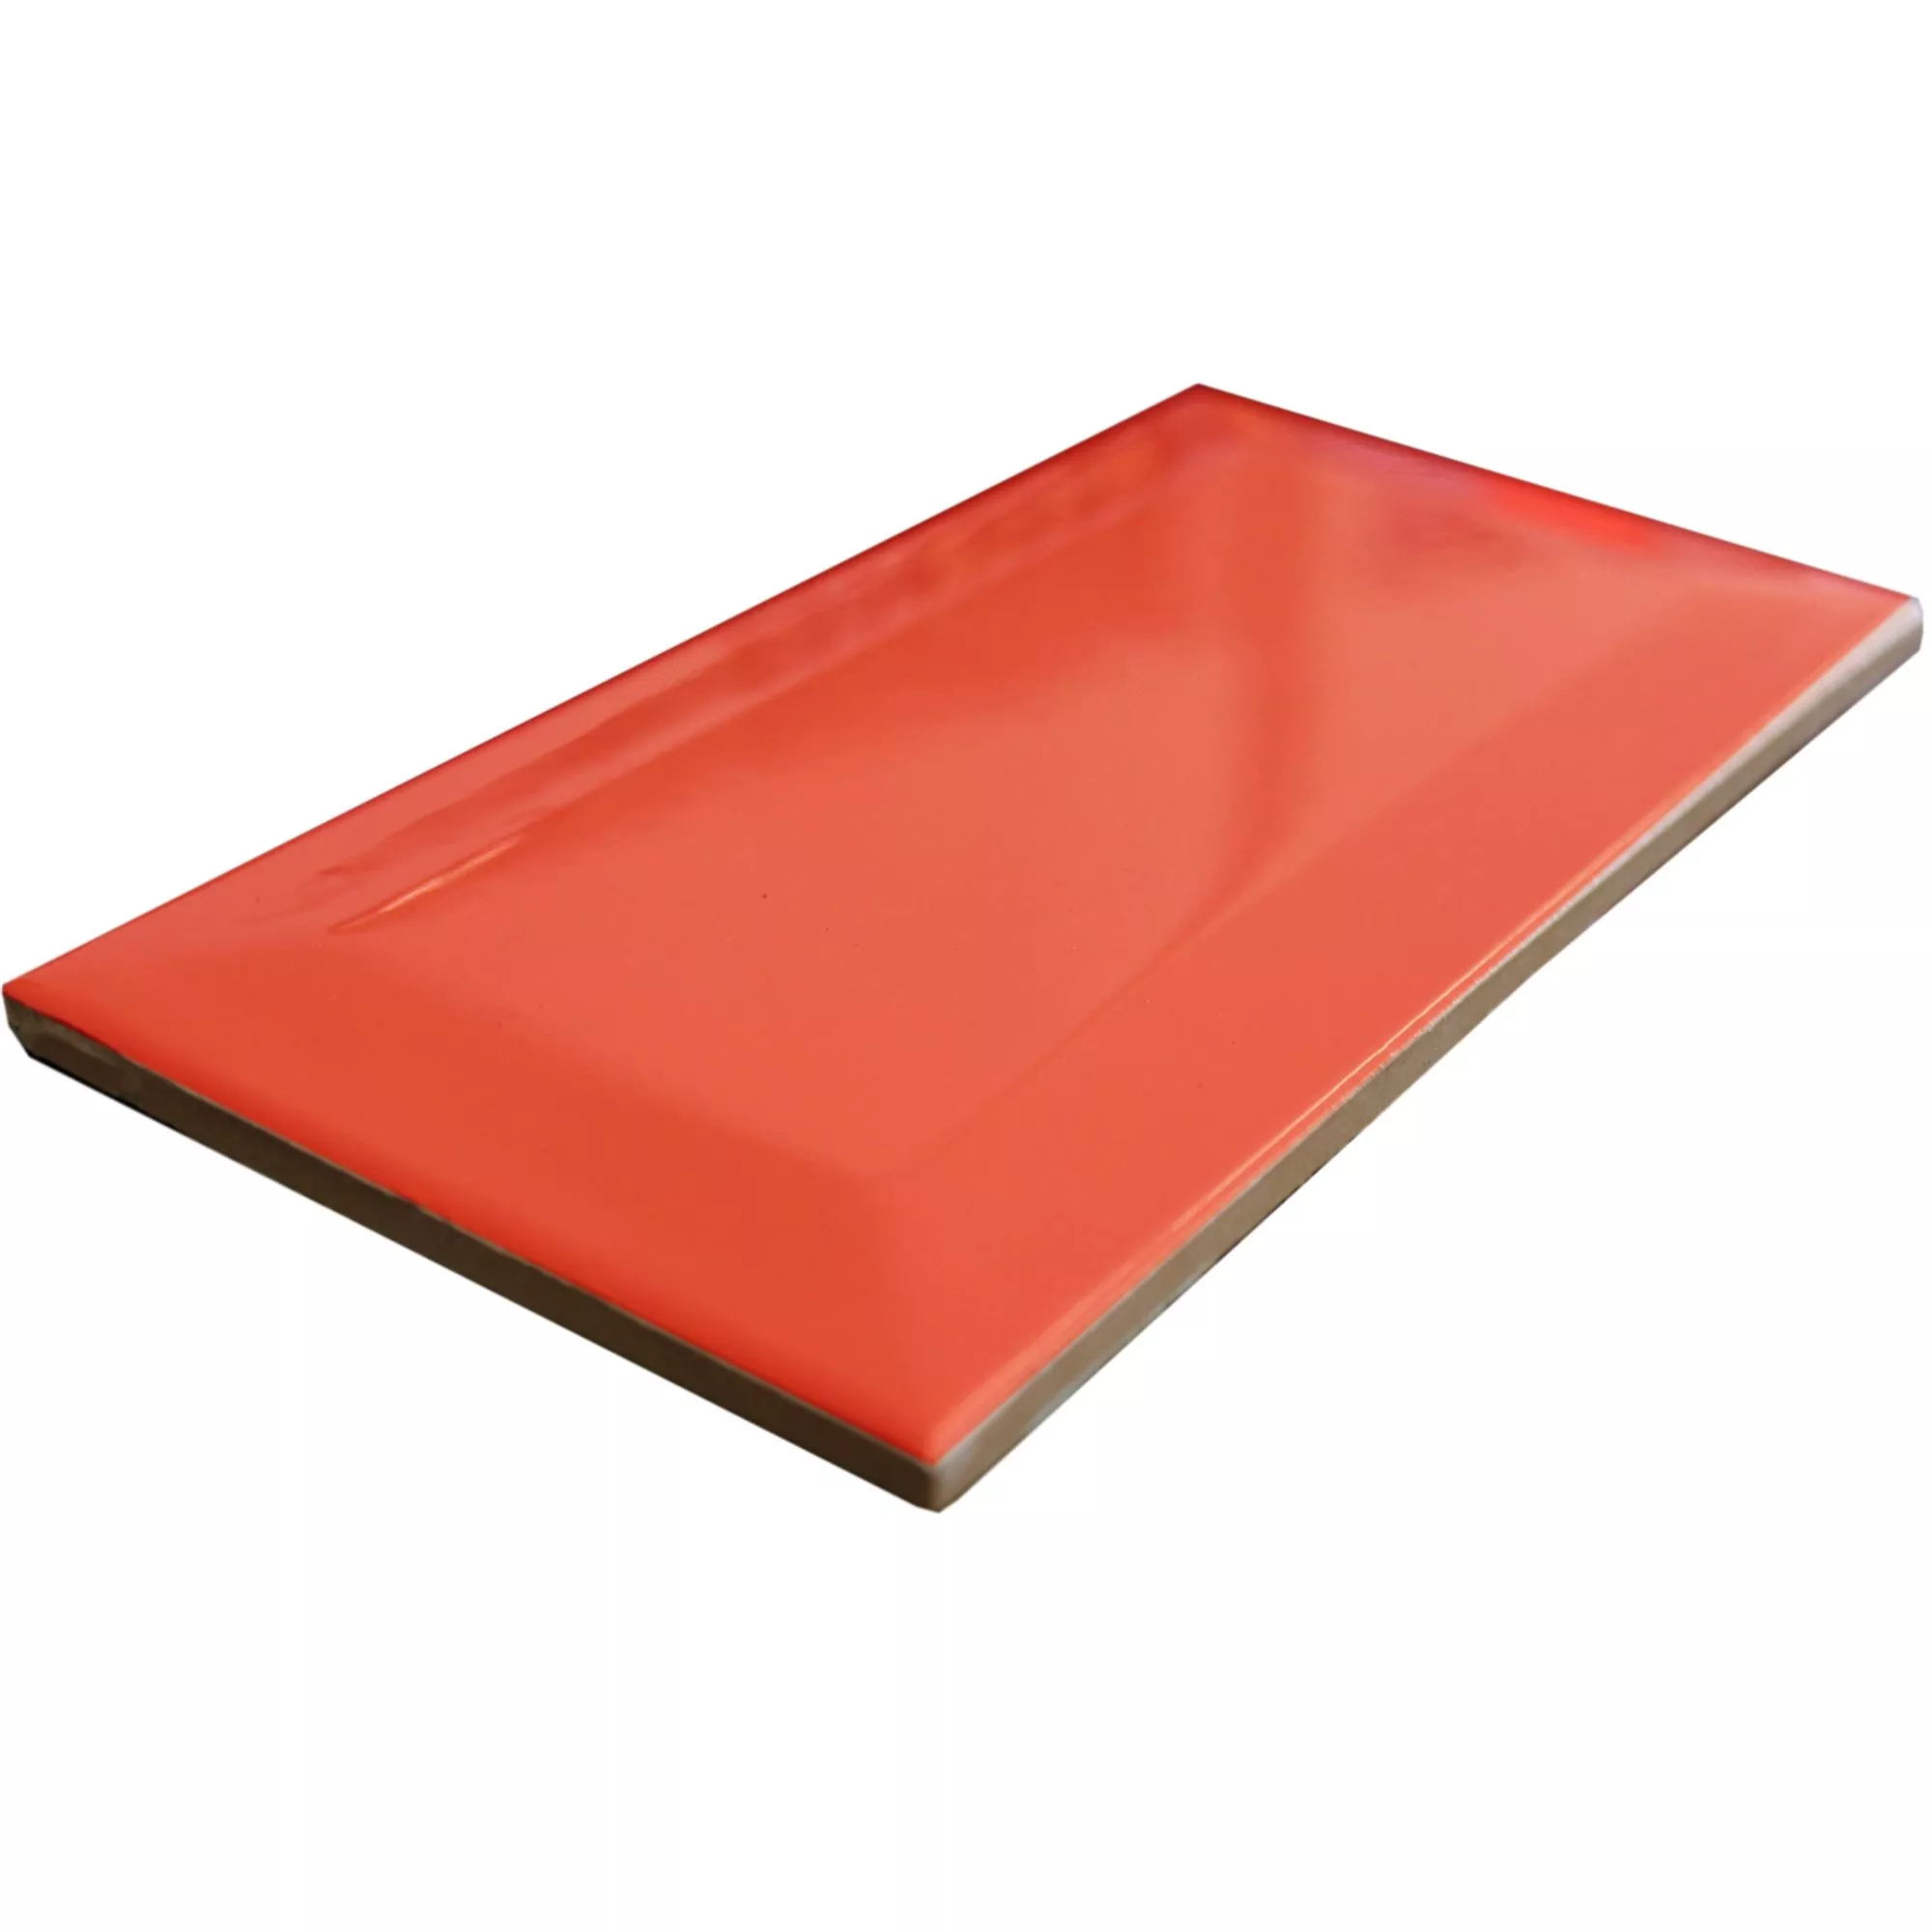 Metro Wall Tiles Colombo Red 10x20cm